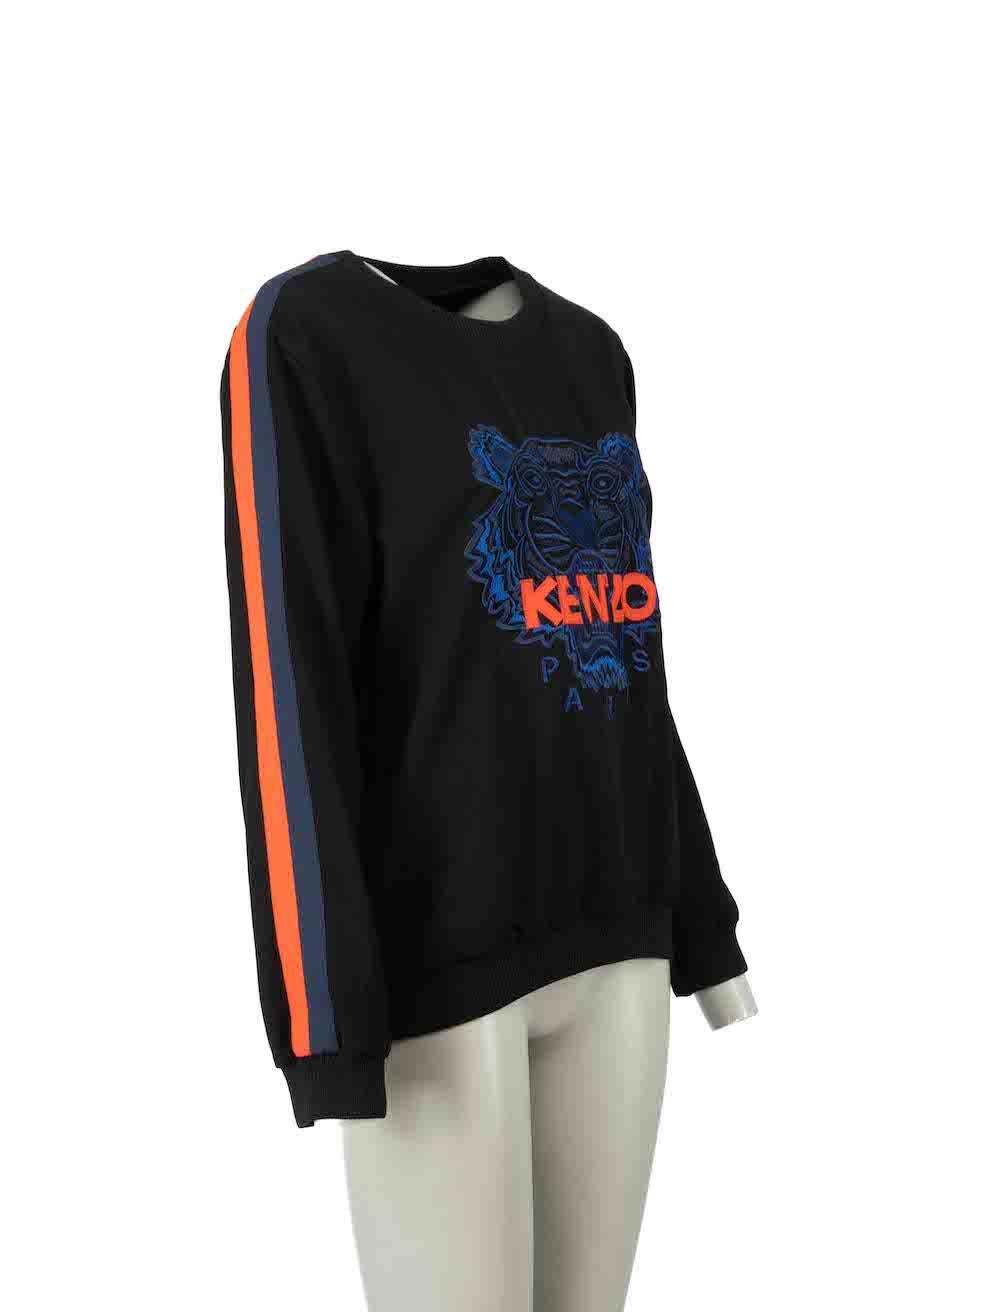 CONDITION is Very good. Hardly any visible wear to sweatshirt is evident on this used Kenzo designer resale item.
 
Details
Black
Synthetic
Jumper
Tiger logo embroidery
Rib knit trim
Round neck
 
Made in Madagascar
 
Composition
82% Triacetate, 18%